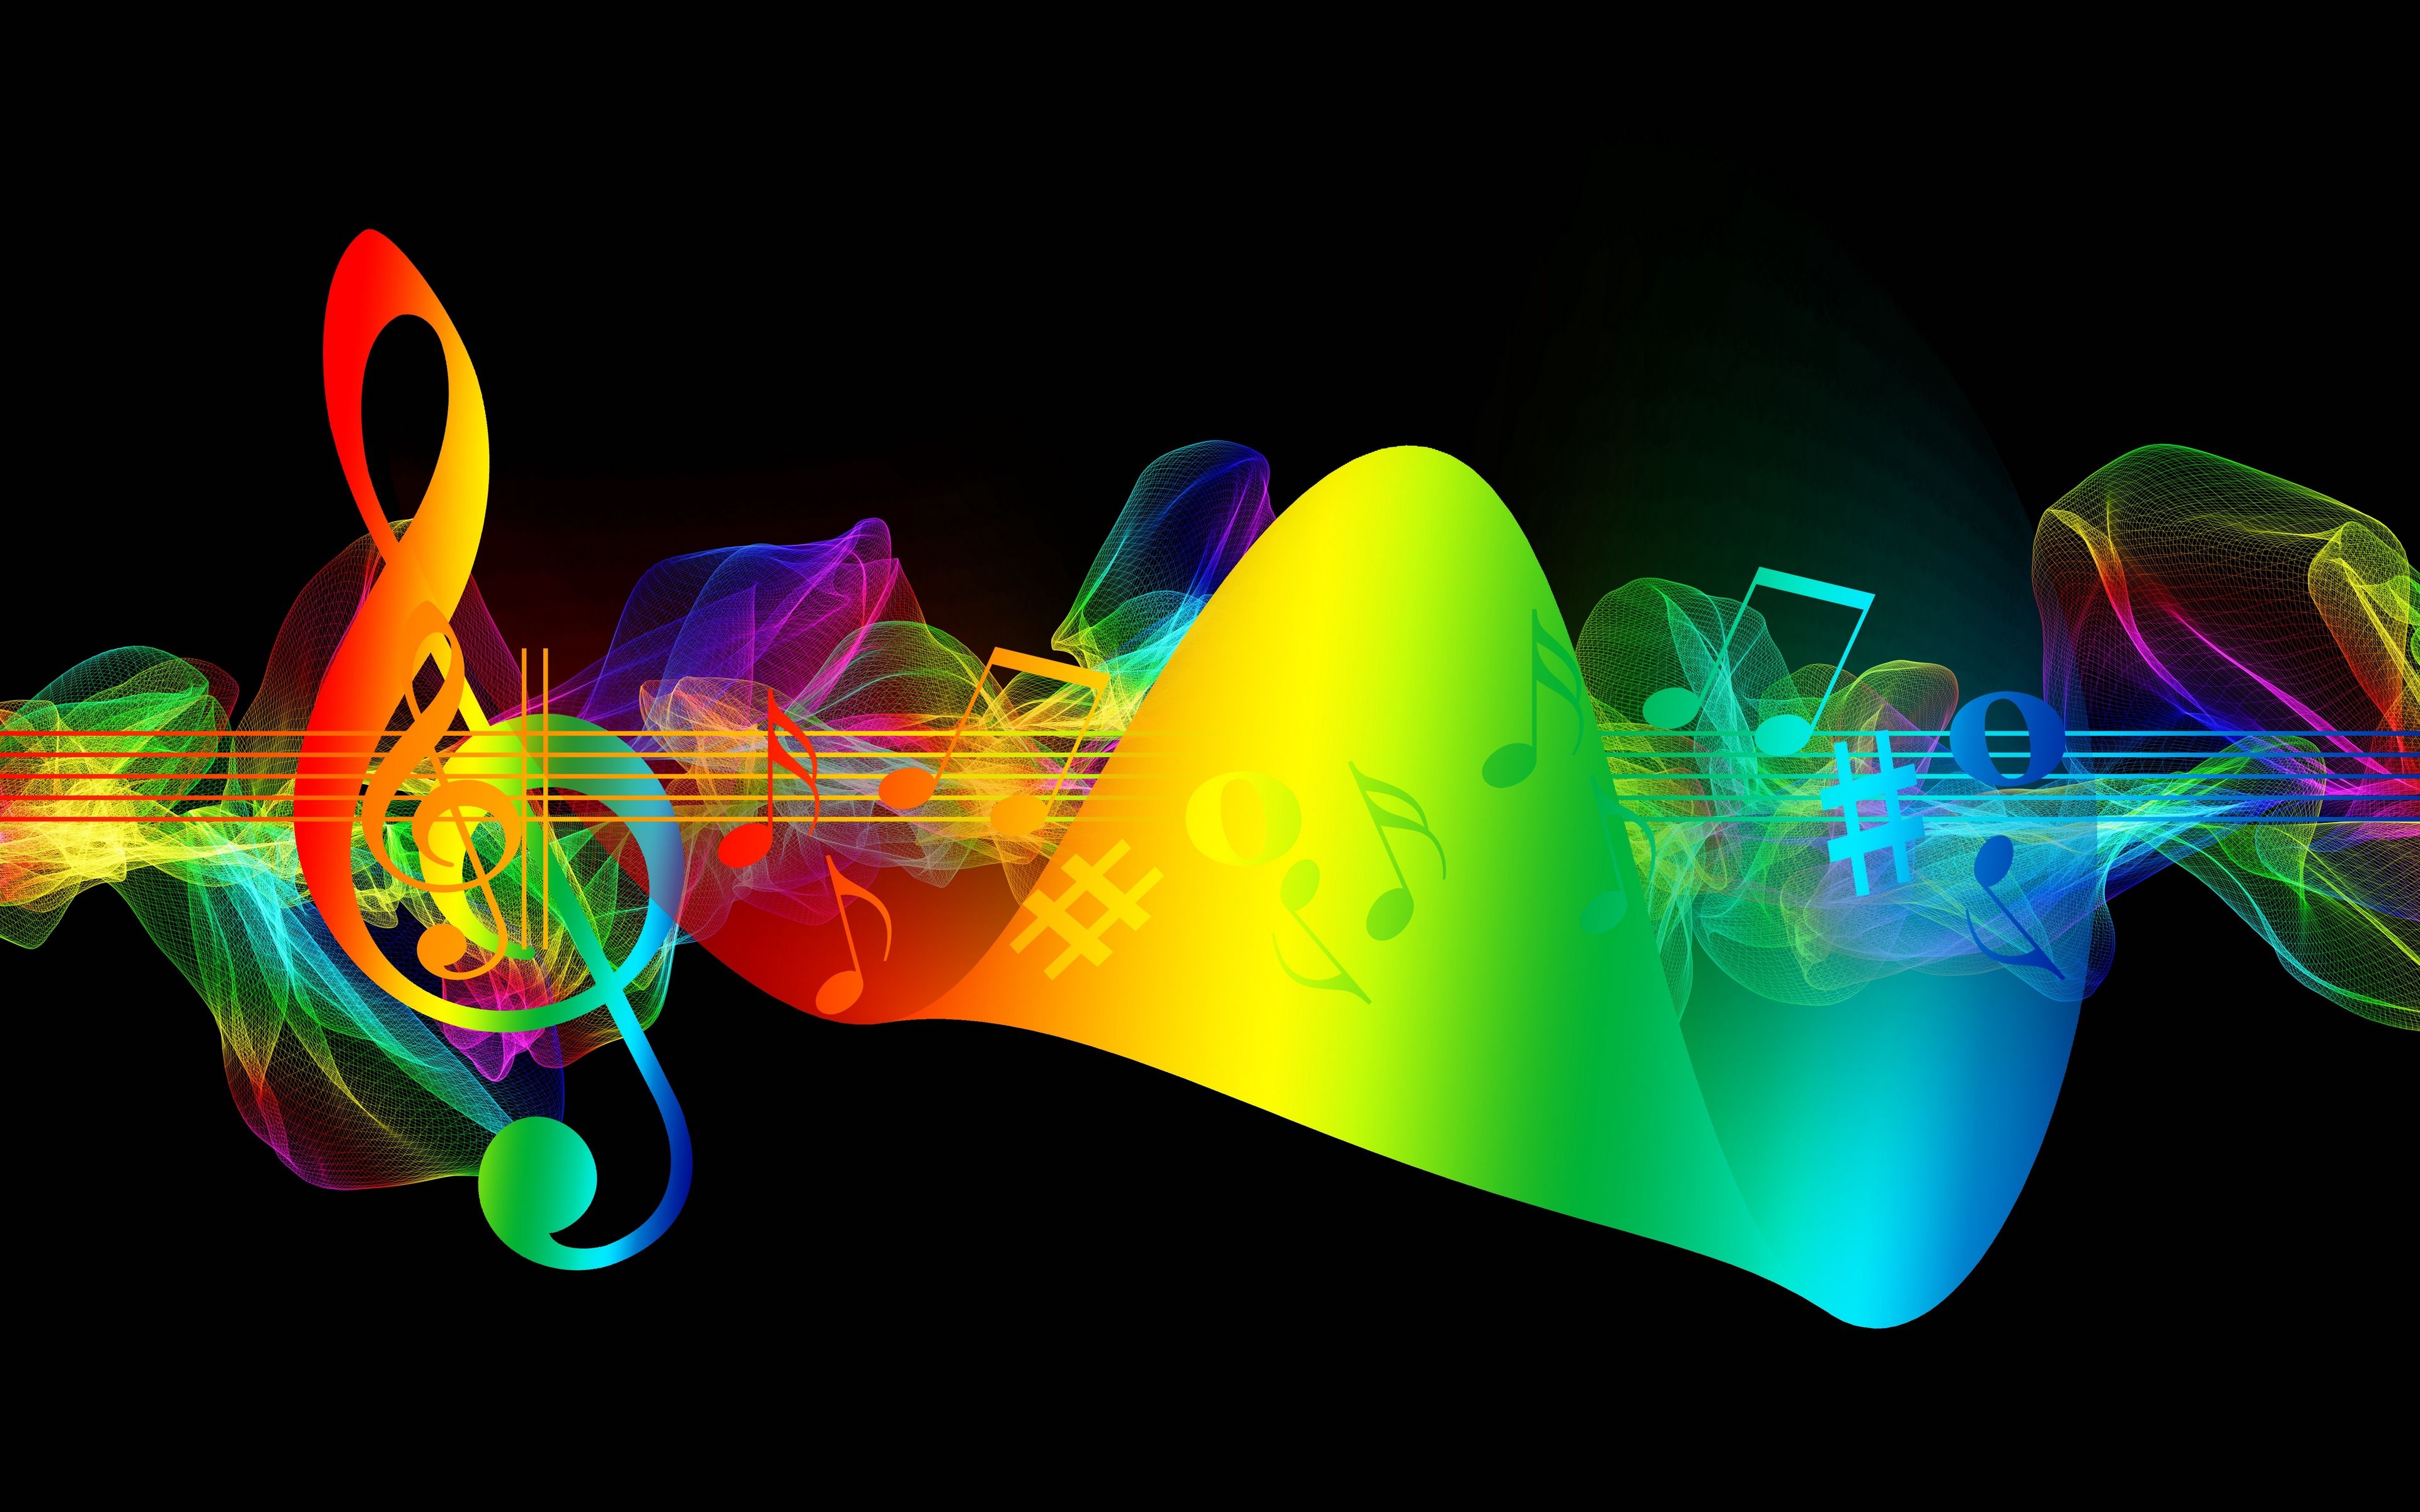 Download wallpaper 3840x2400 treble clef, musical notes